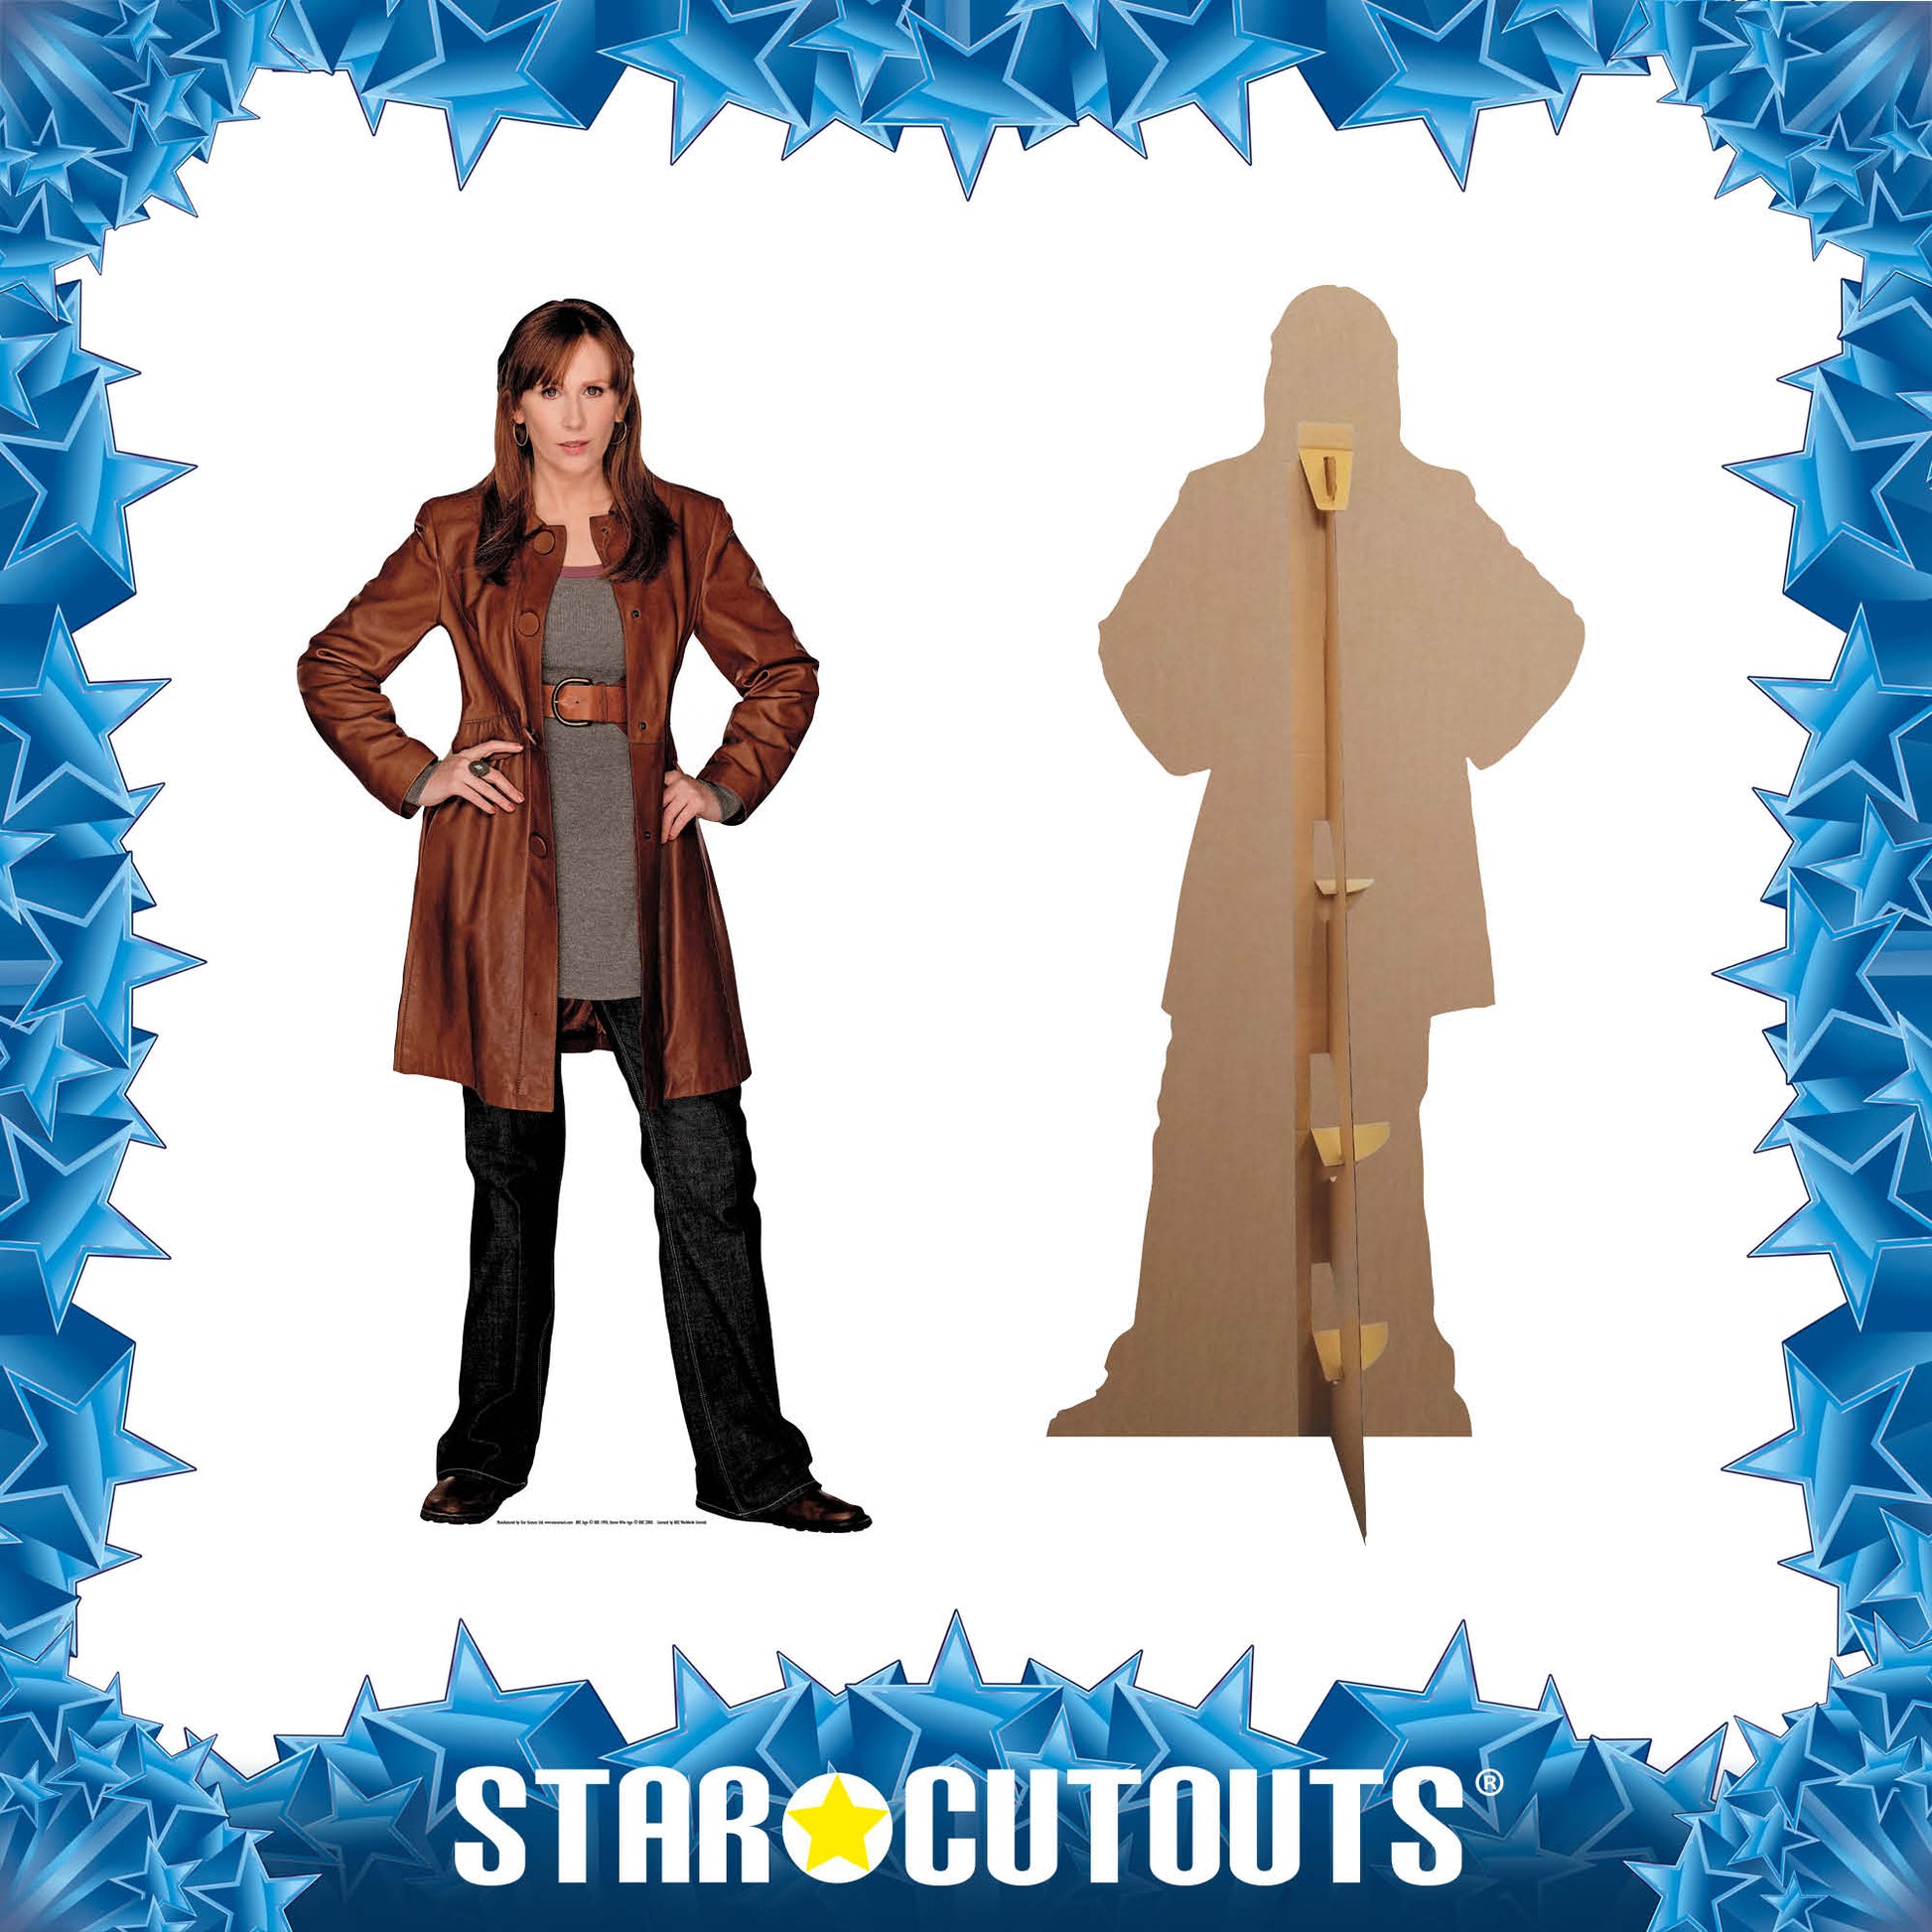 Donna Noble Cardboard Cut Out Height 169cm - Star Cutouts